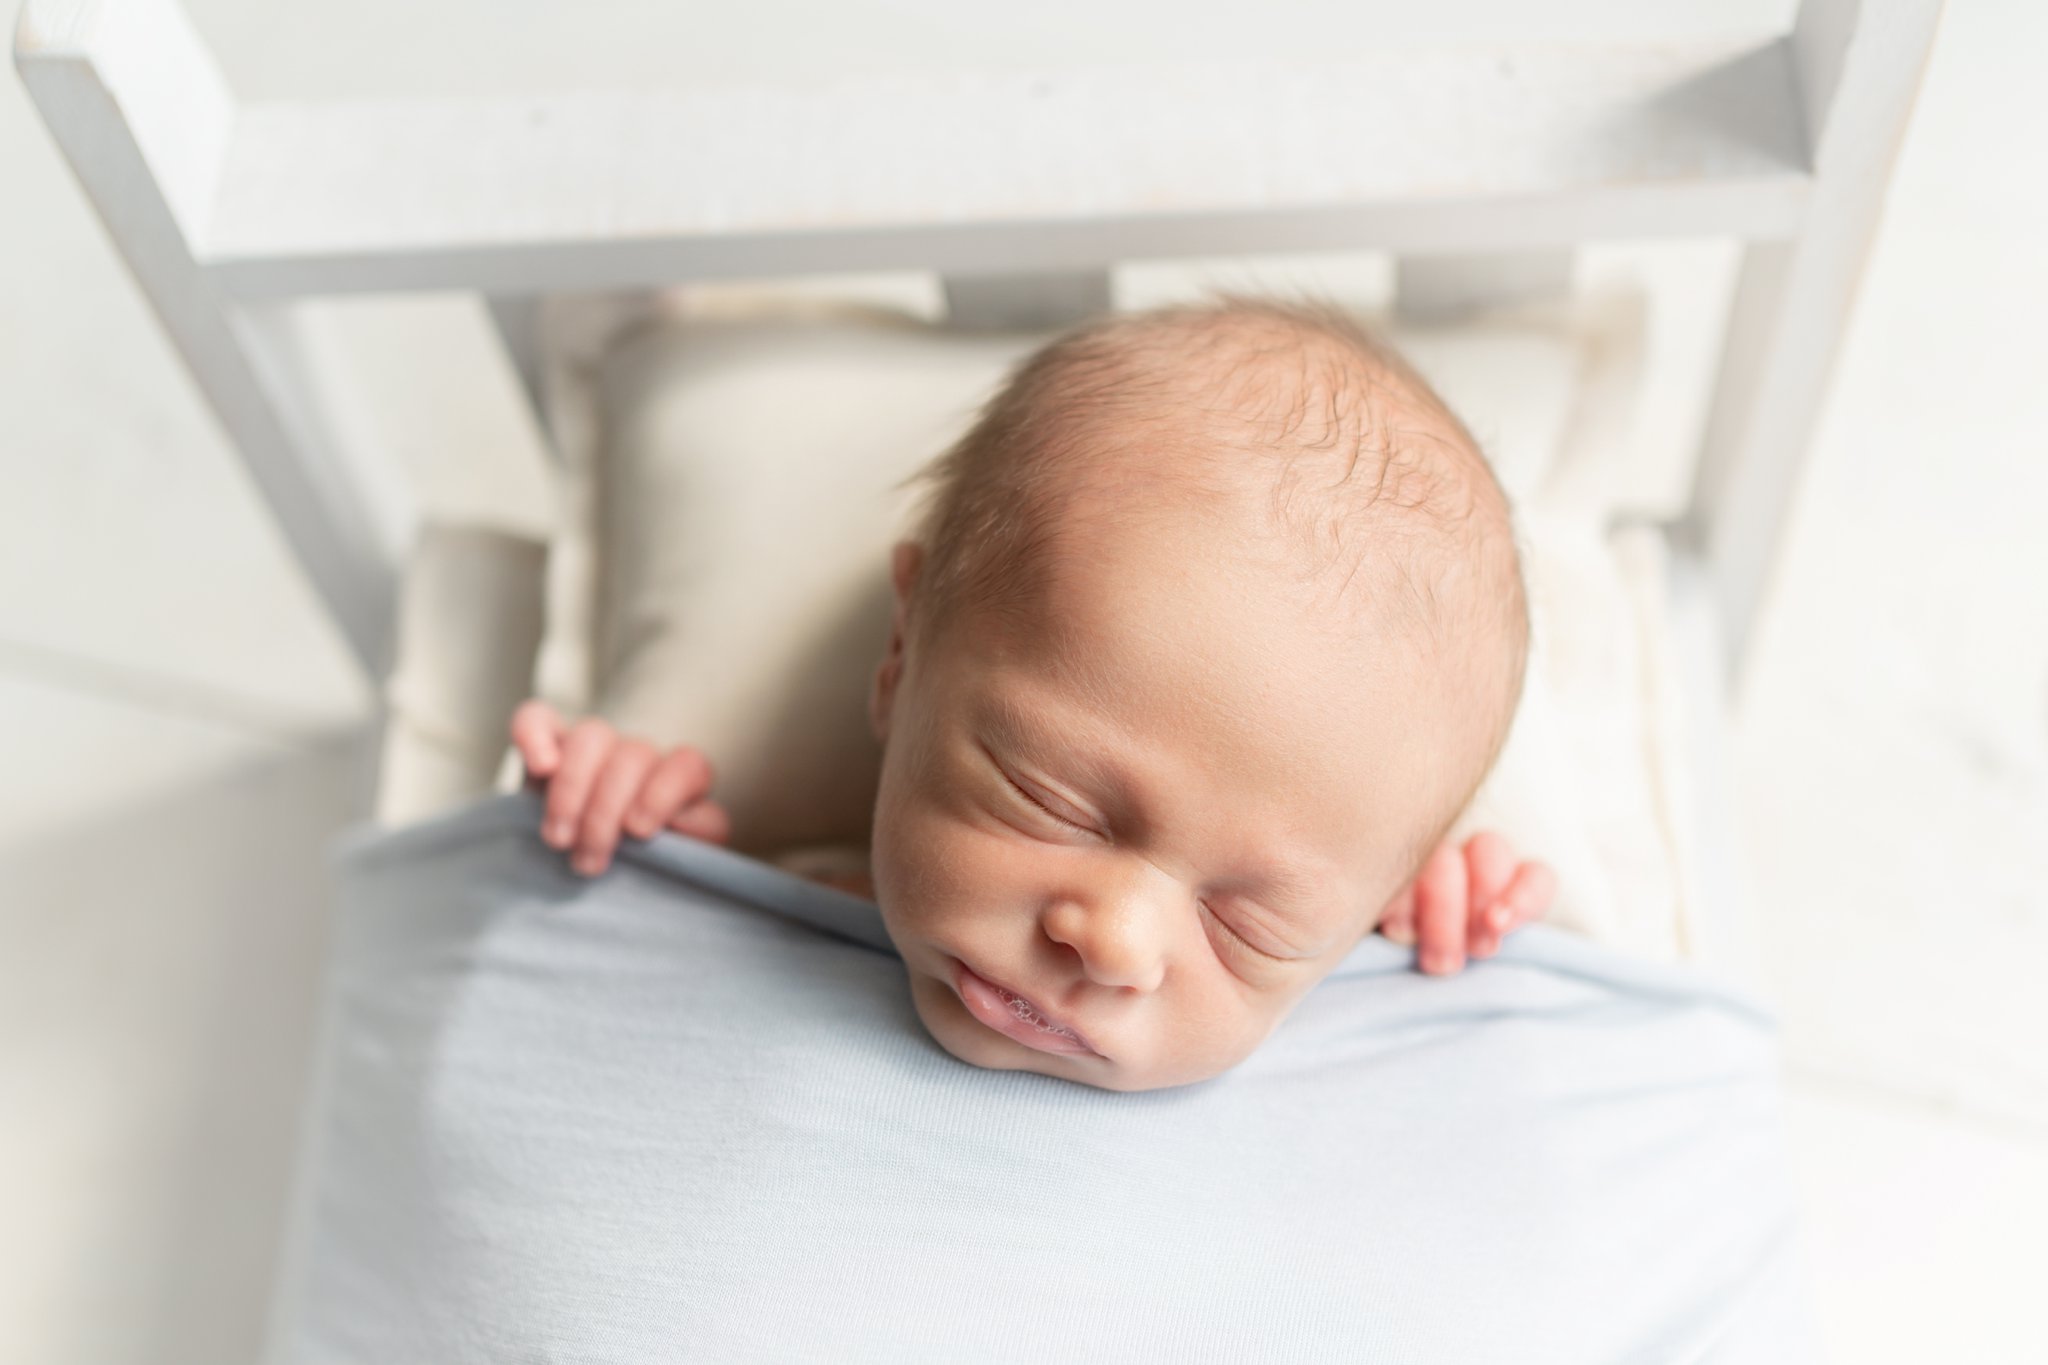 Newborn baby in tucked into little wooden prop bed being photographed in south florida photo studio.